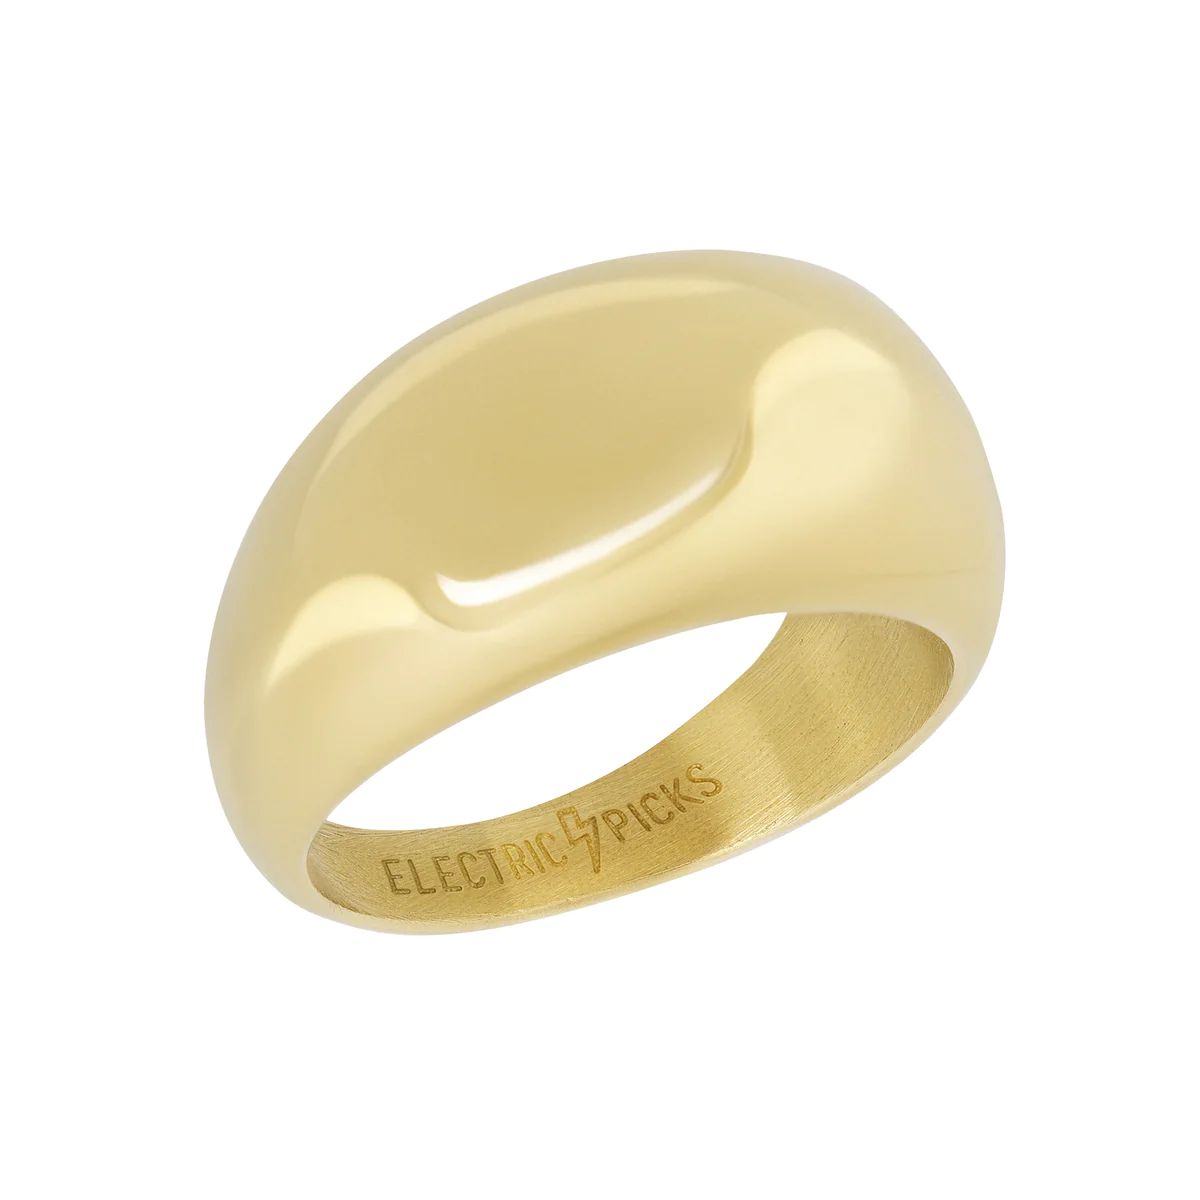 Allure Ring | Electric Picks Jewelry